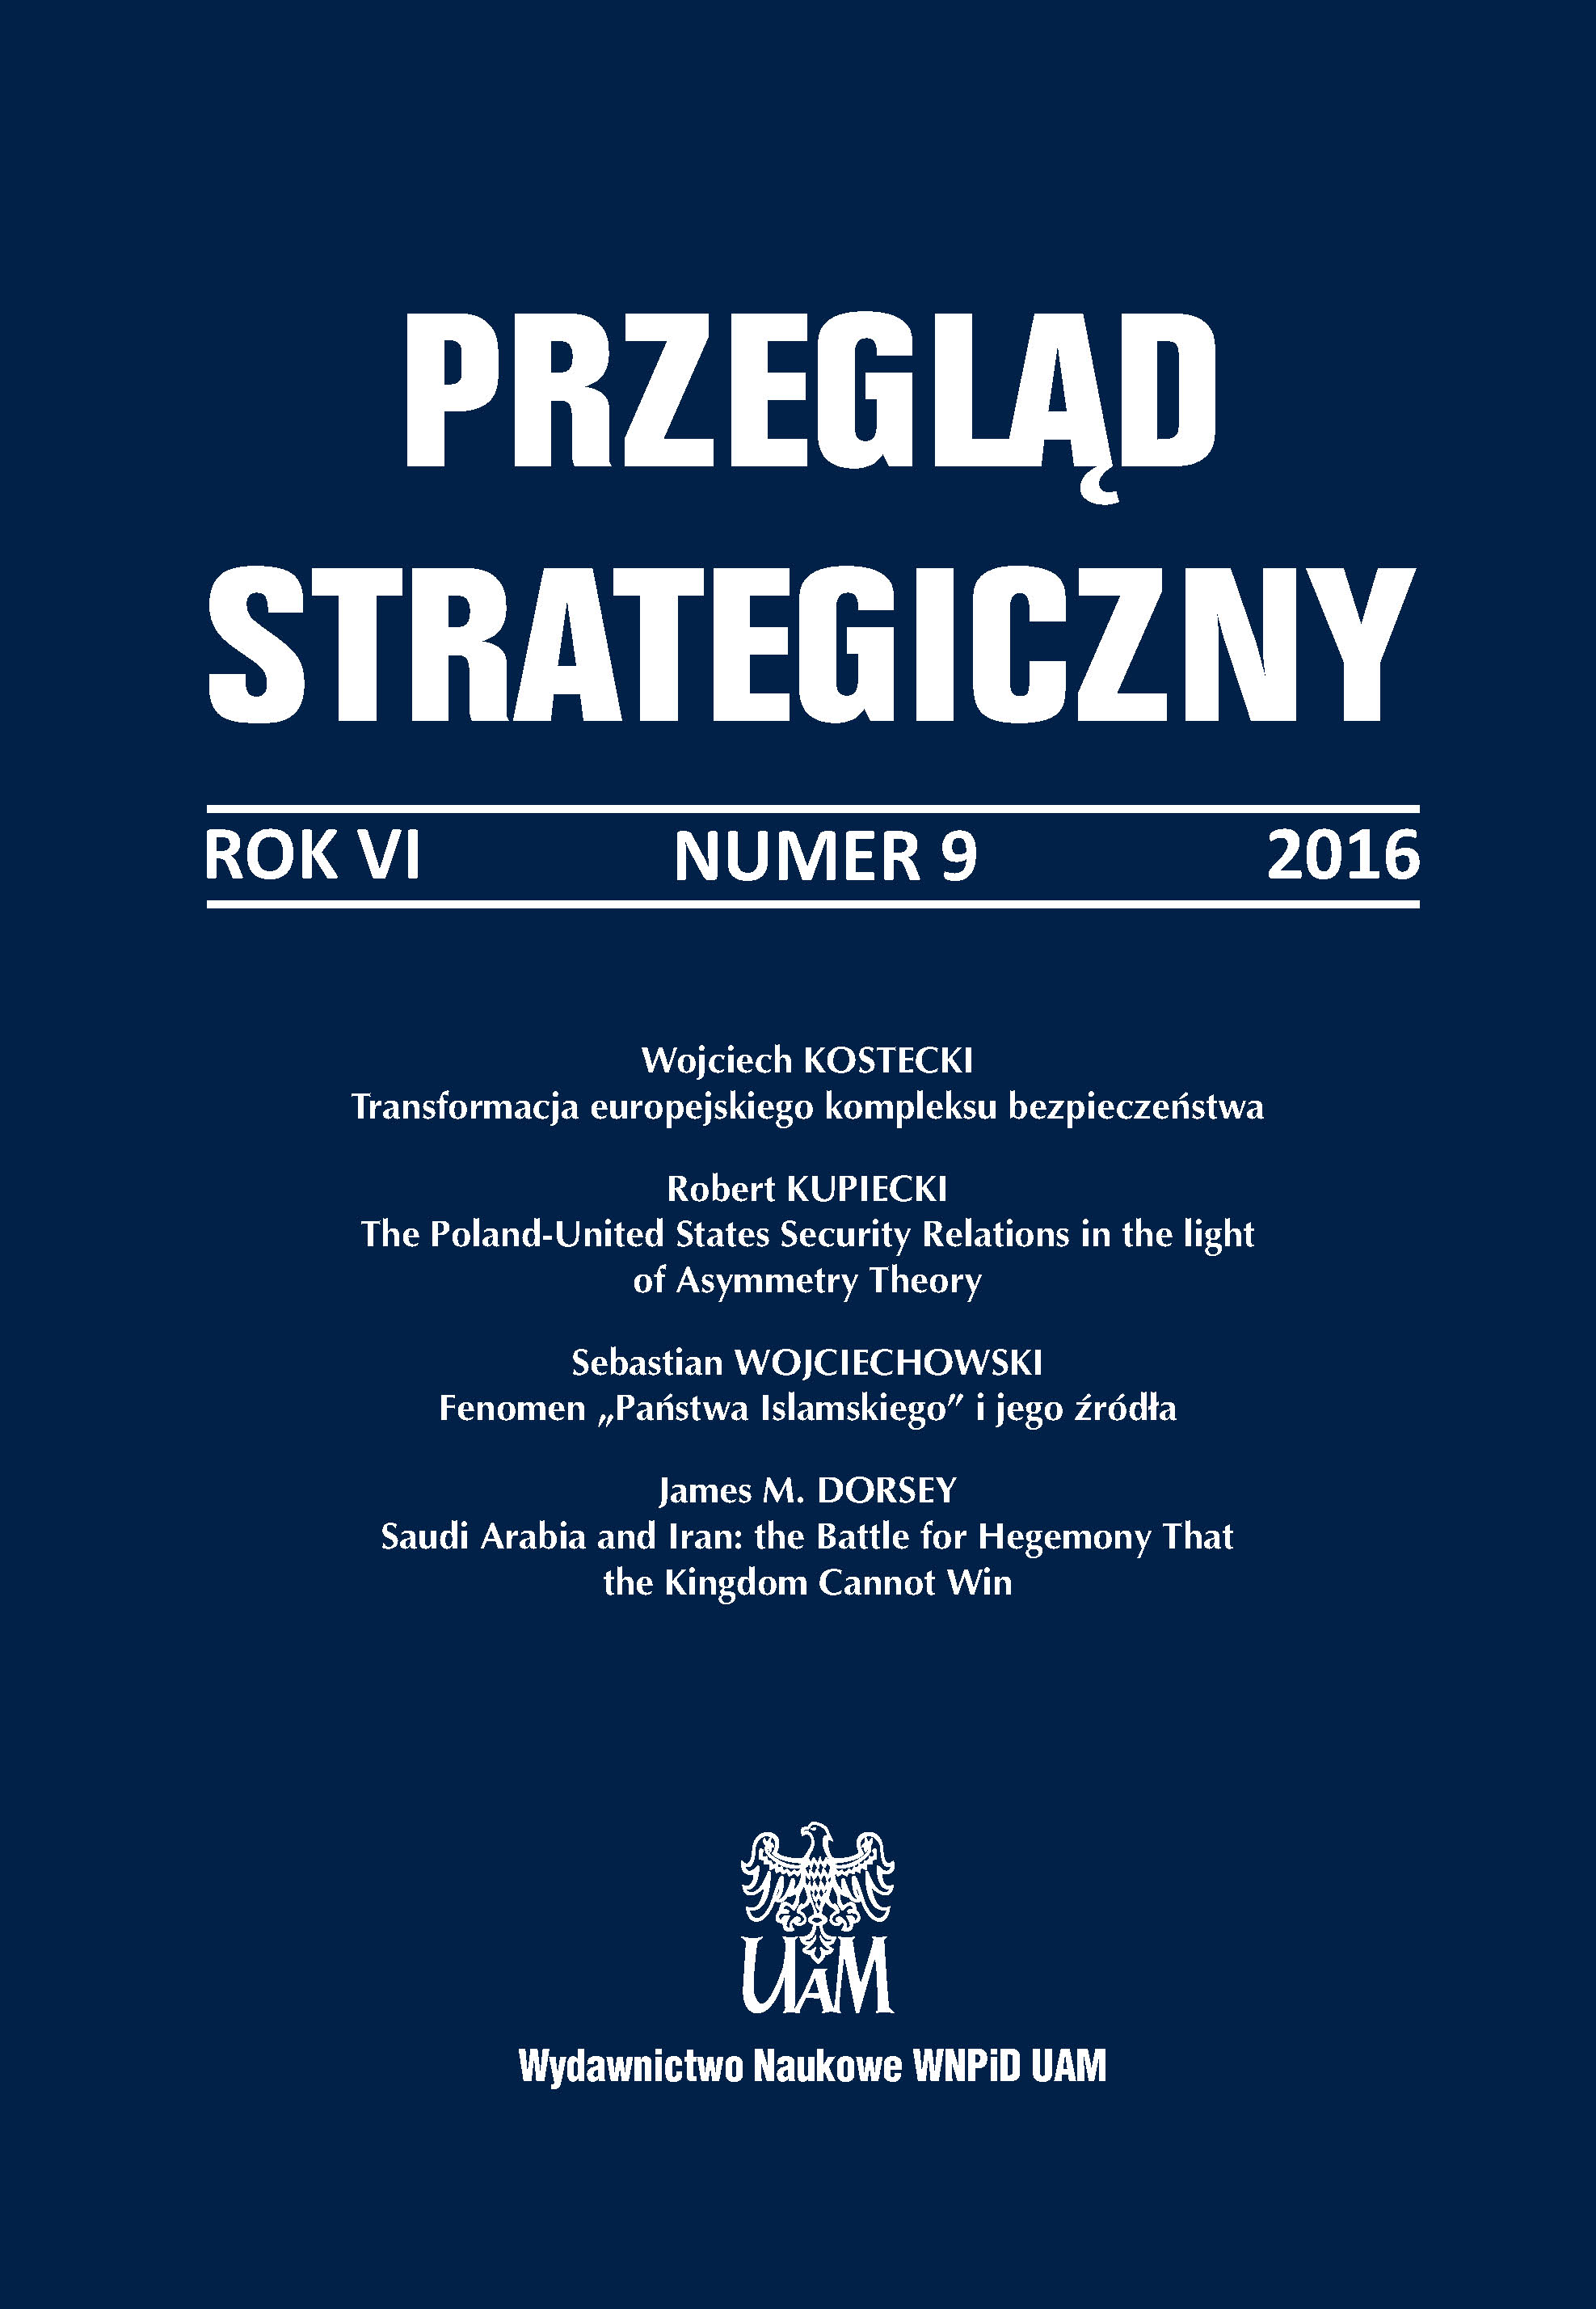 The Poland-United States security relations in the light of asymmetry theory